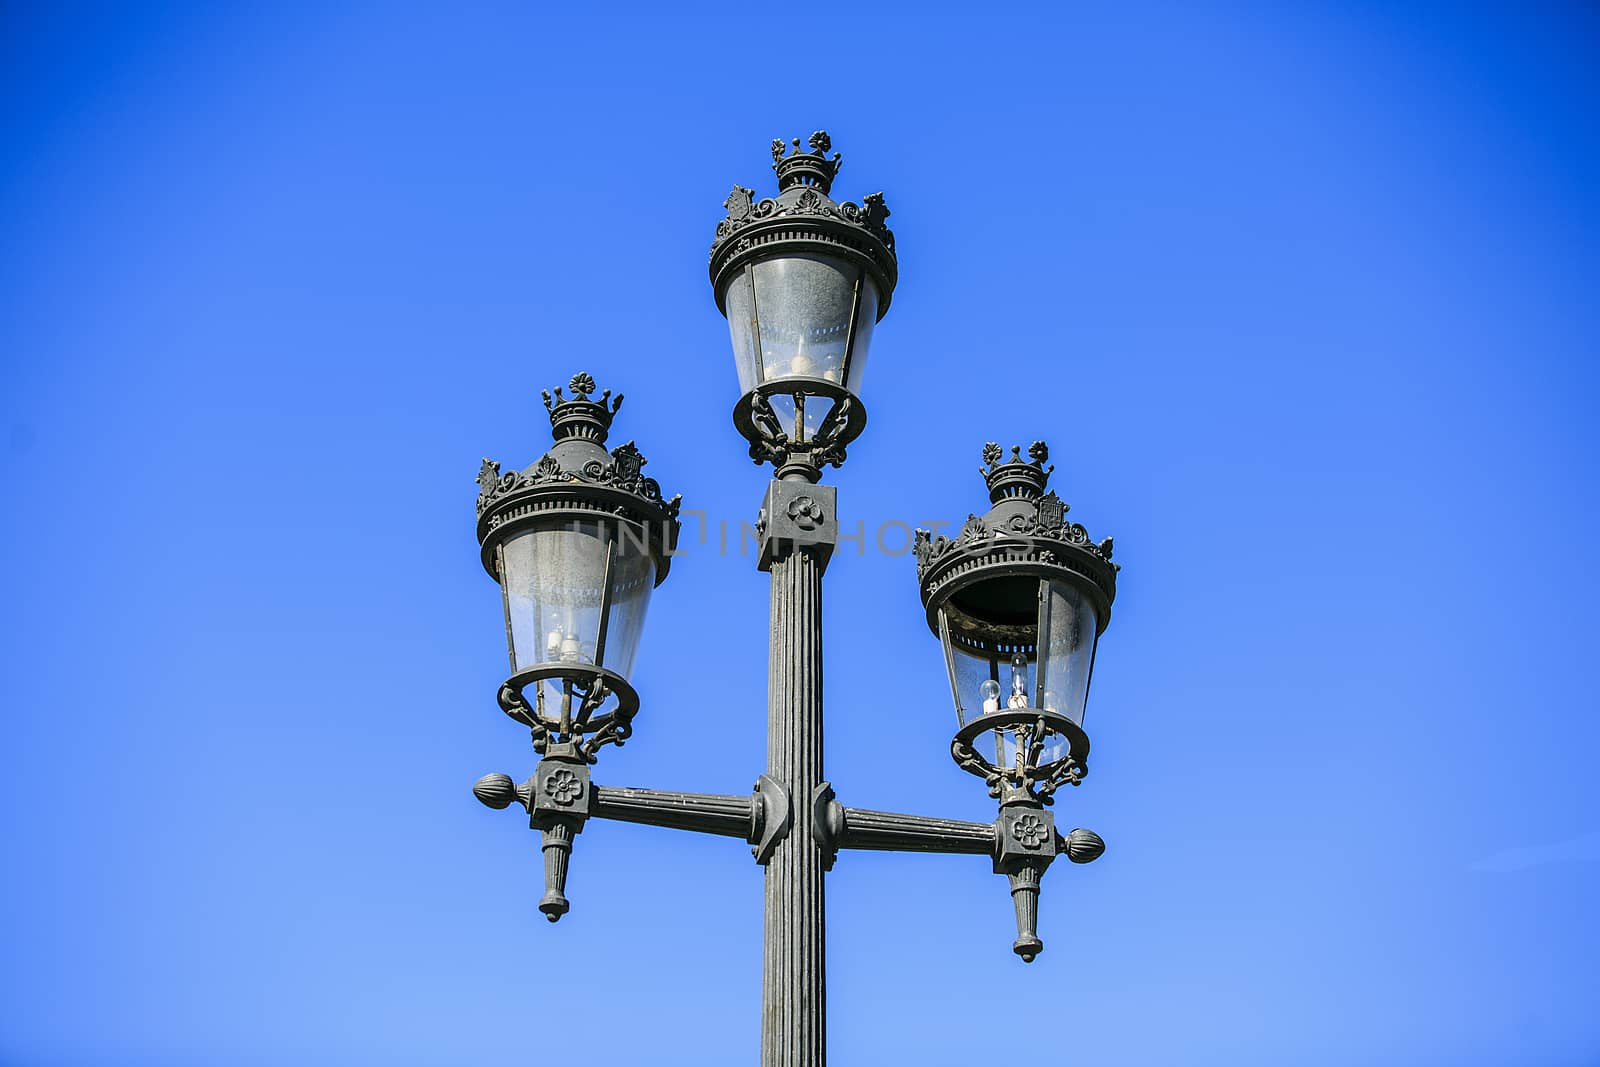 Typical street light sited in Barcelona